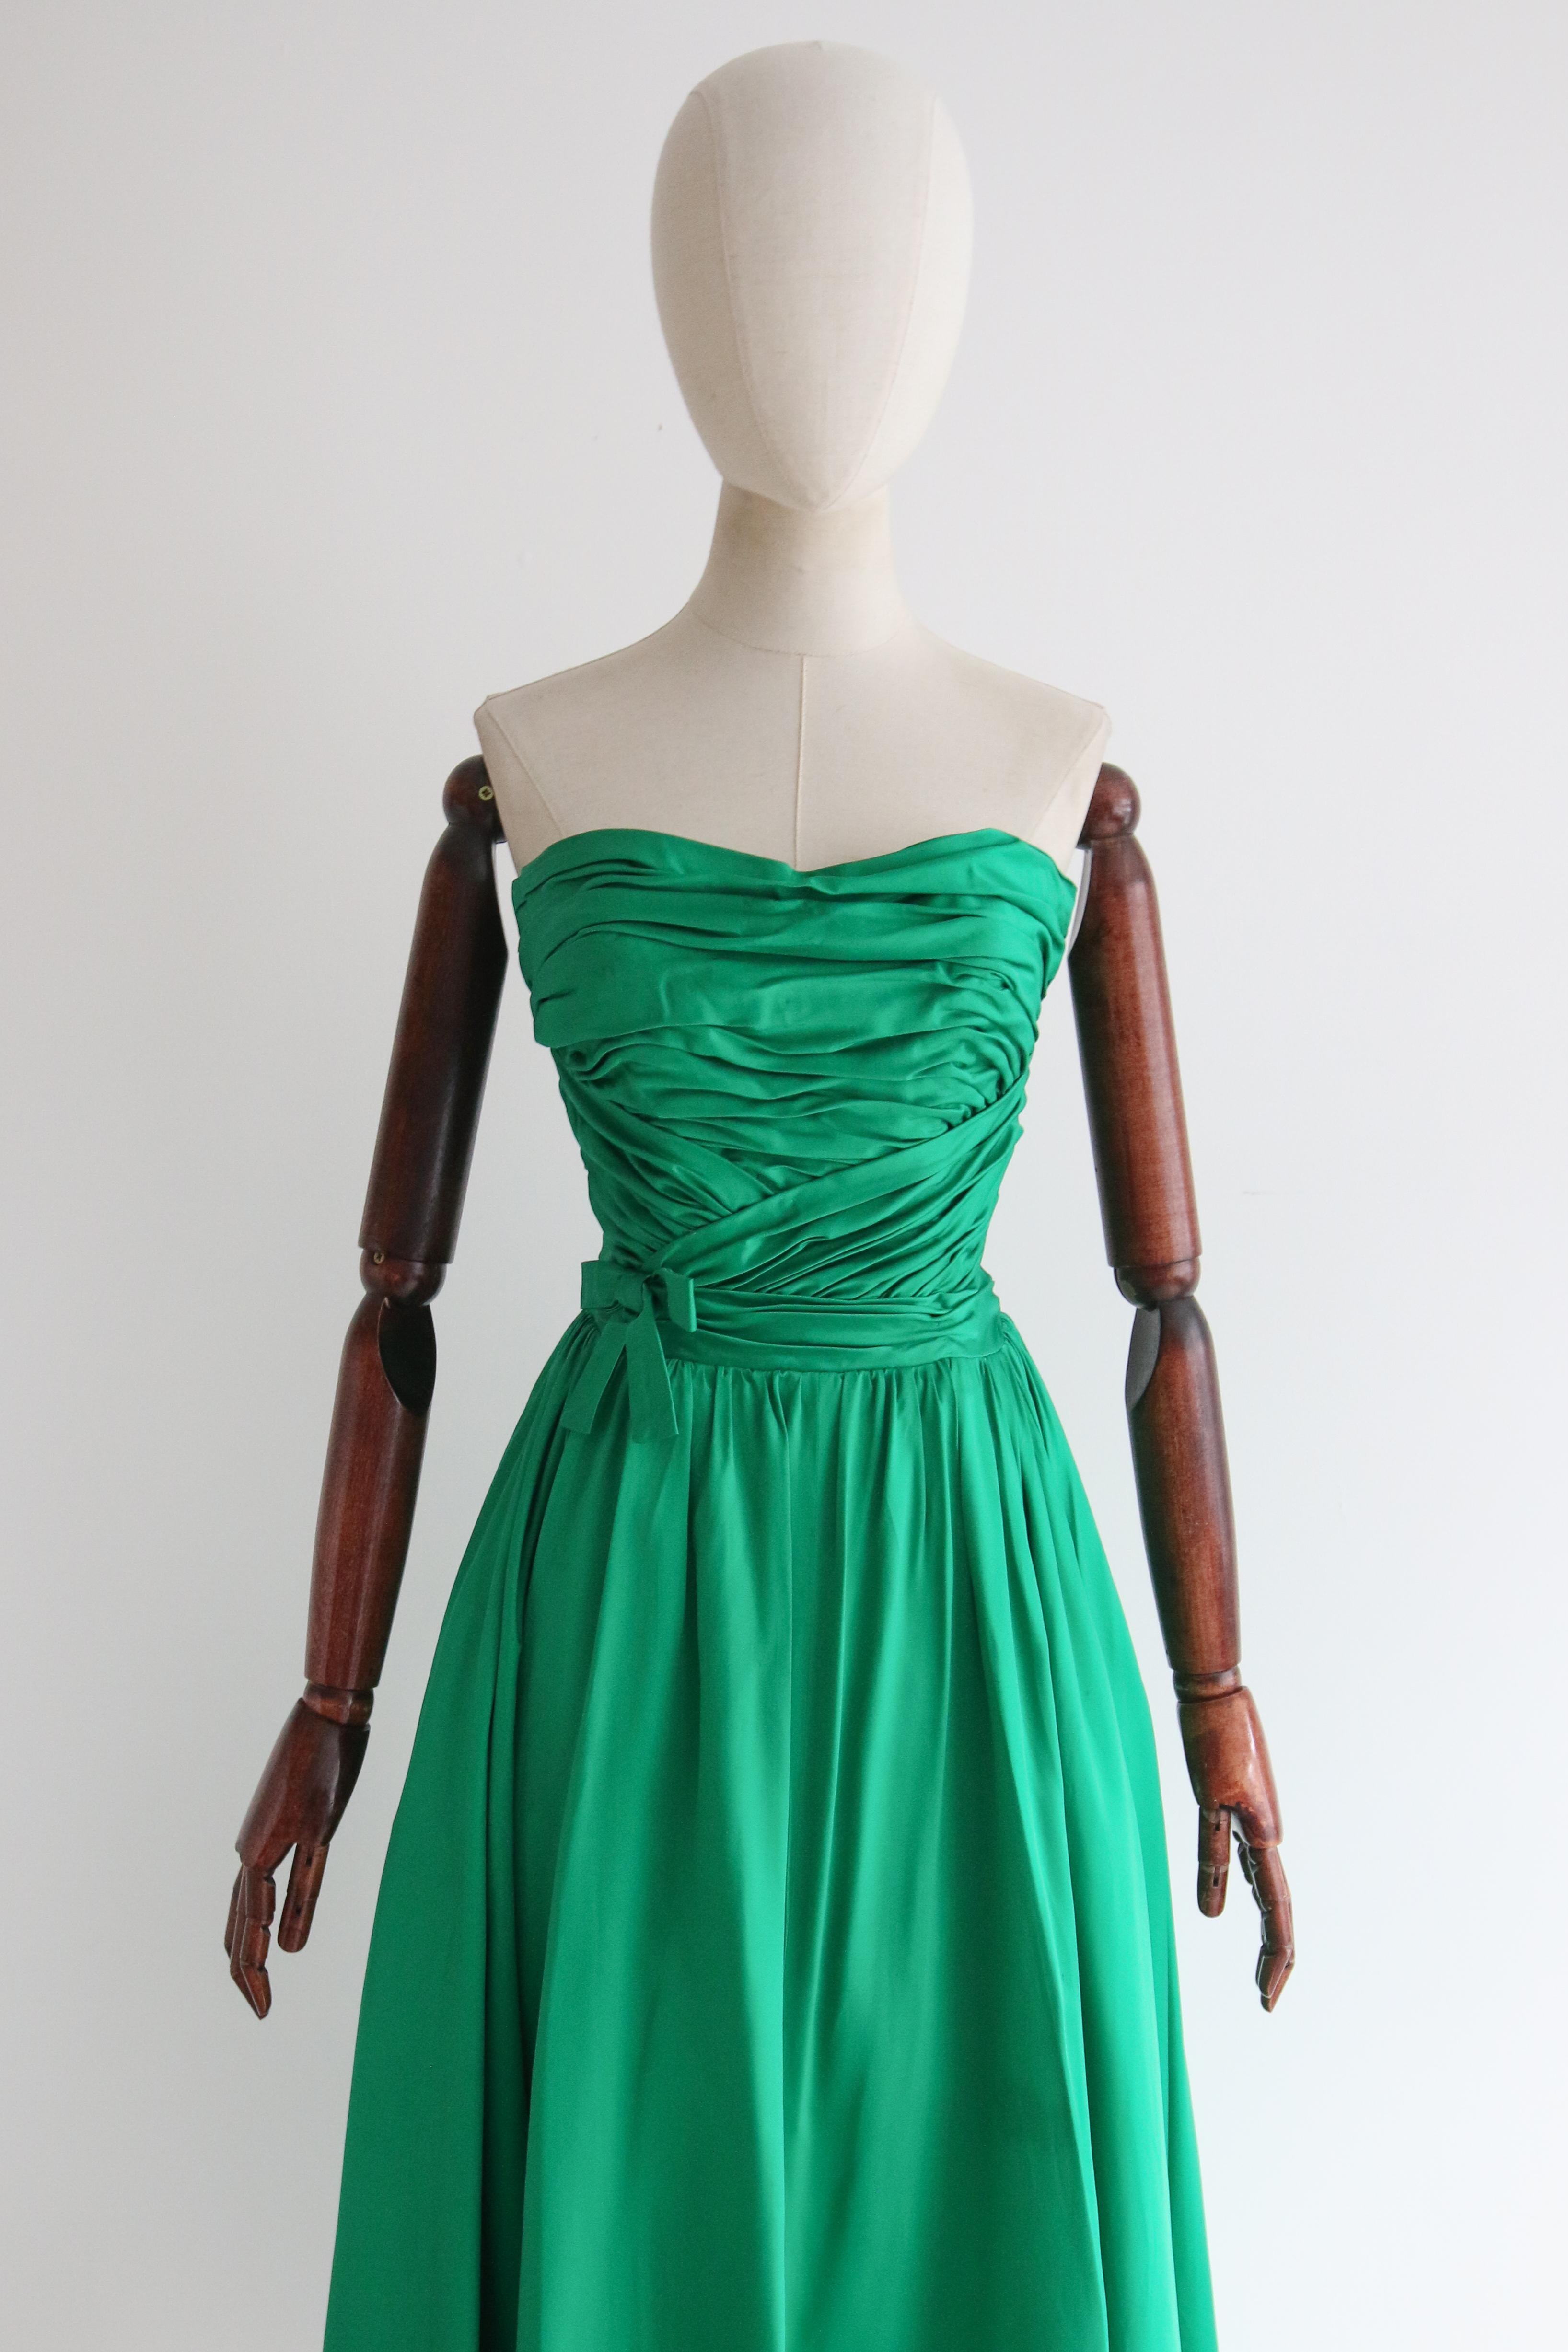 Vintage 1950's Emerald Green Satin Pleated Strapless Dress UK 6 US 2 Susan Small In Good Condition For Sale In Cheltenham, GB